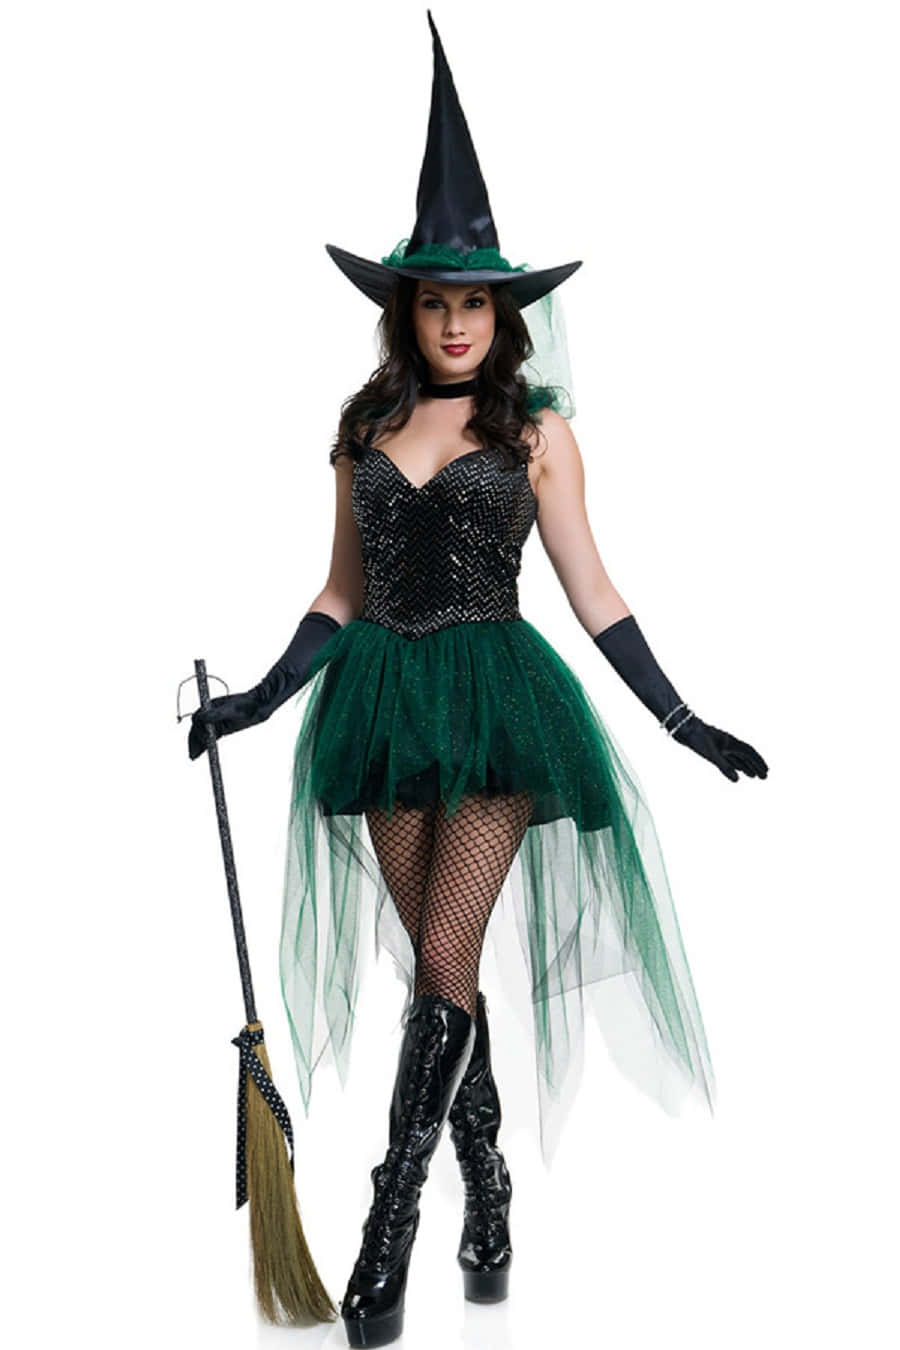 Captivating Witch Costume Wallpaper